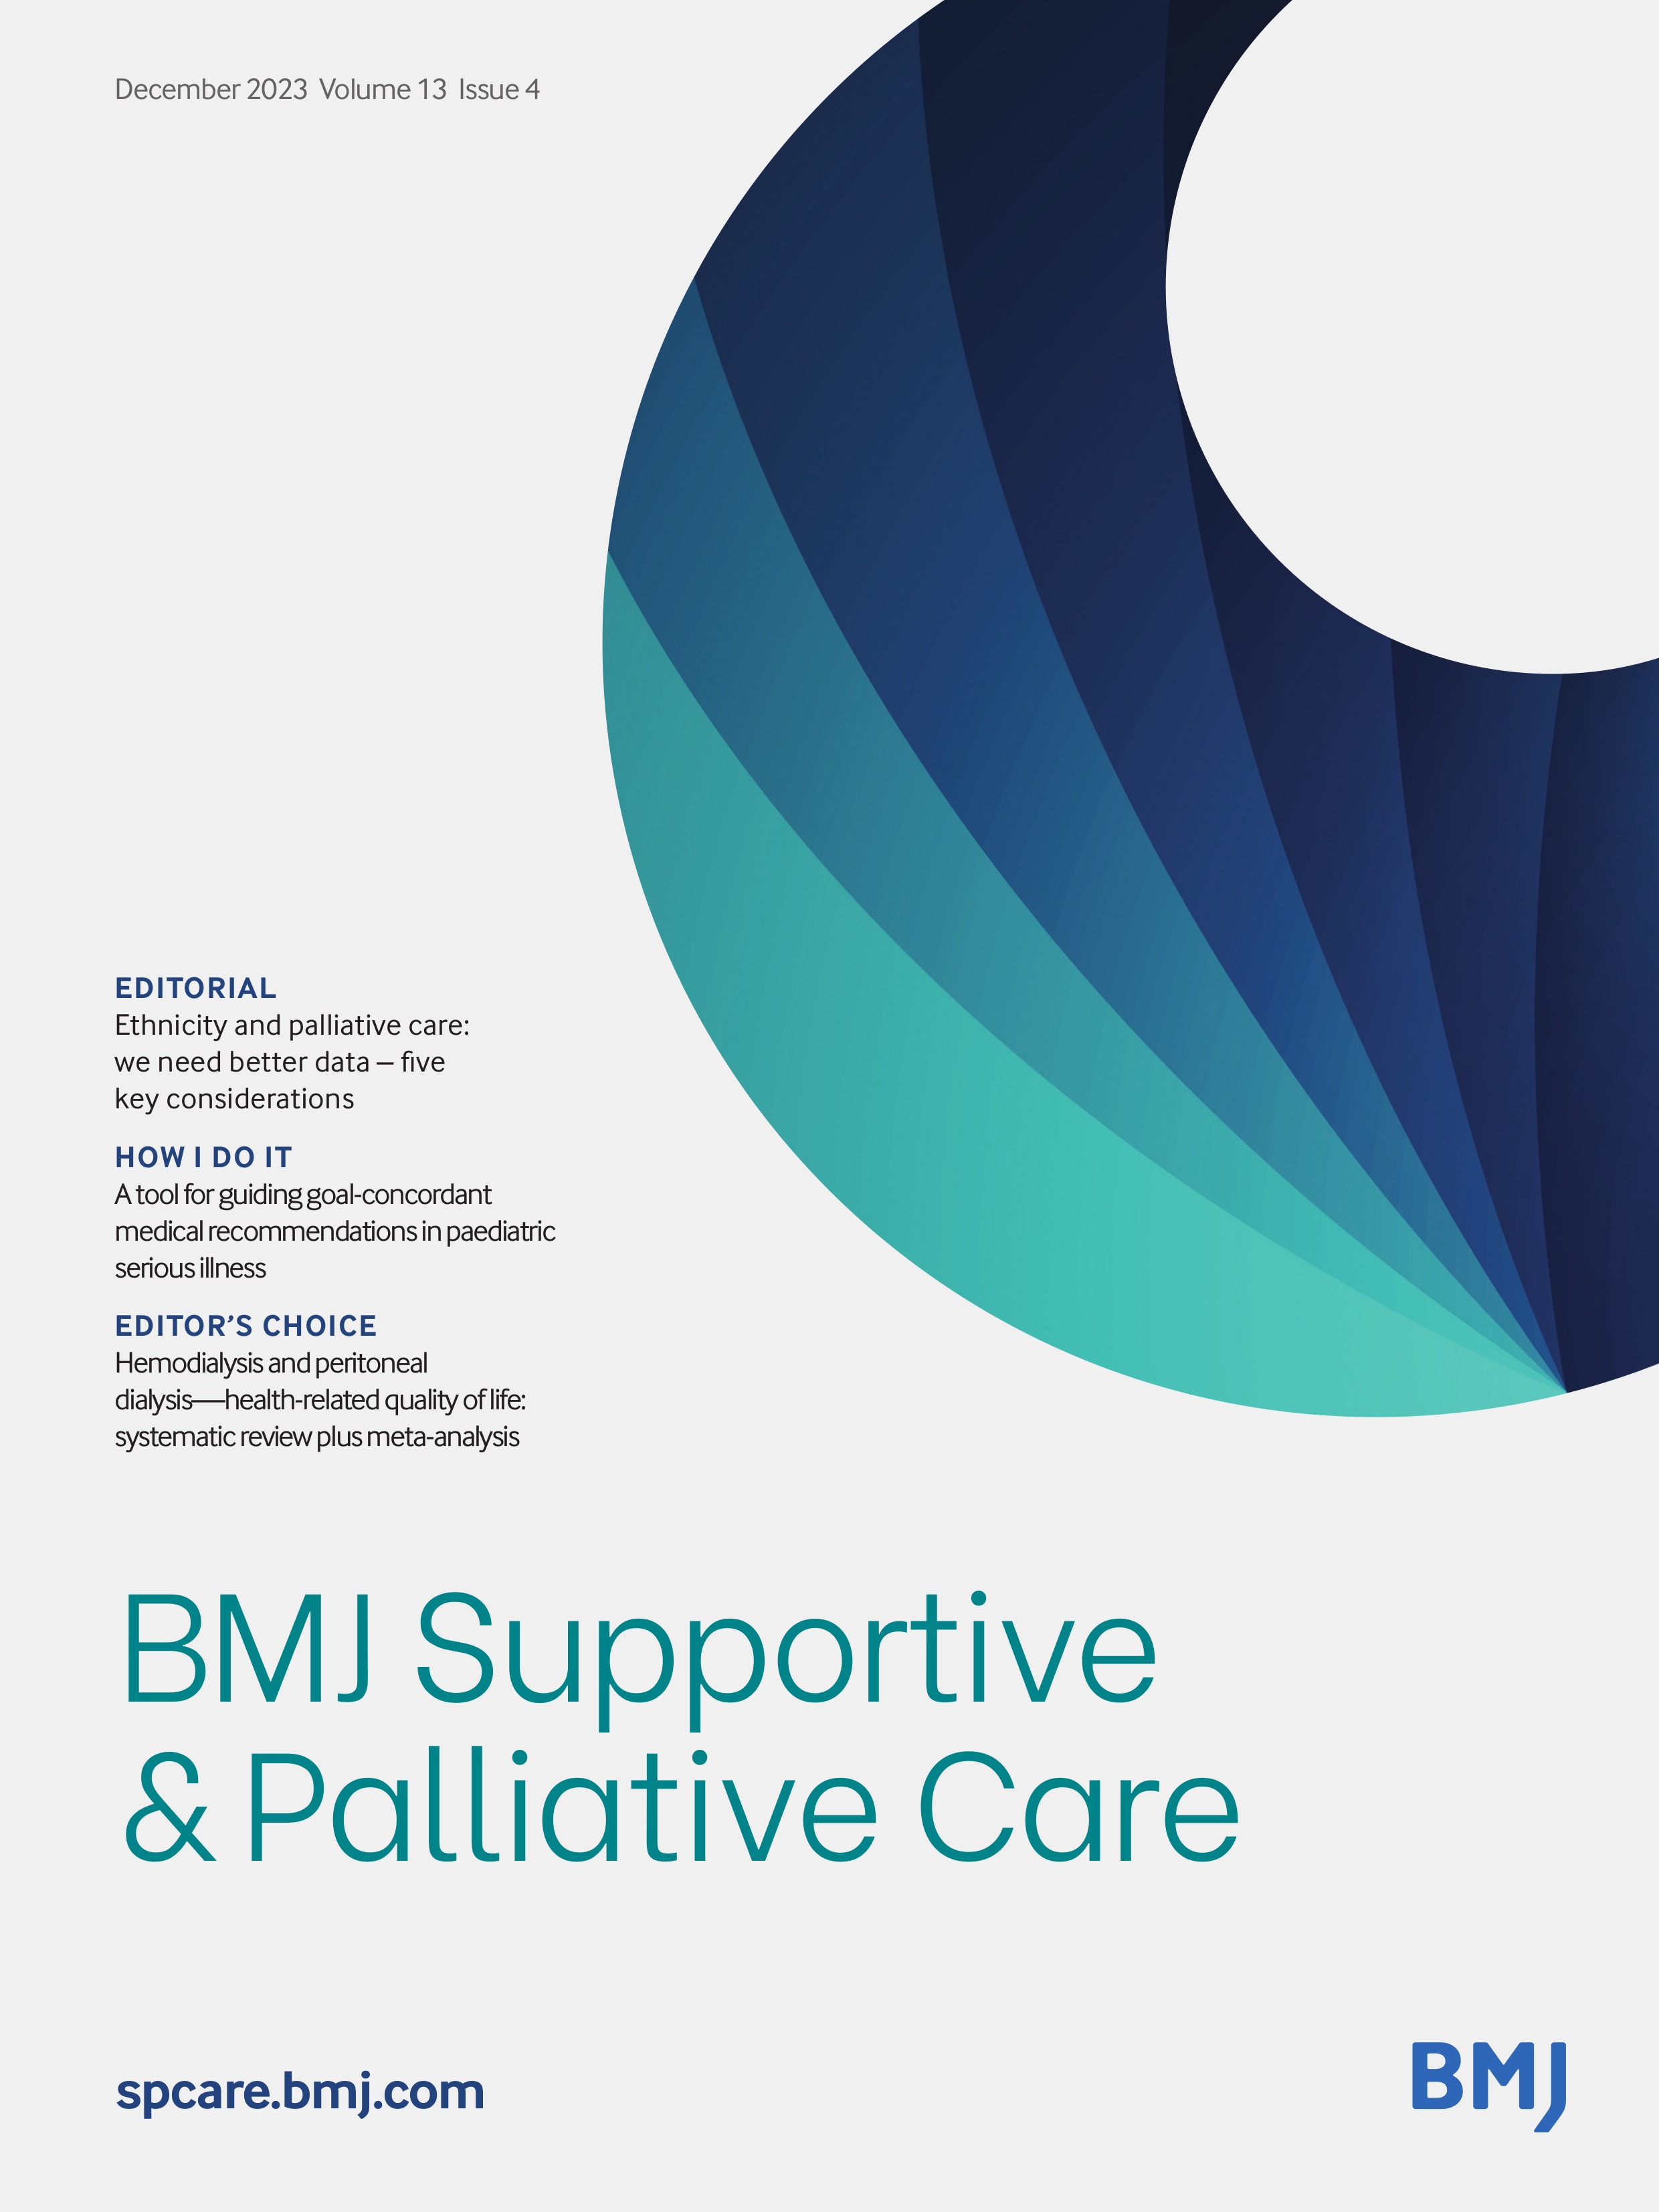 Decision-making in palliative care: patient and family caregiver concordance and discordance--systematic review and narrative synthesis